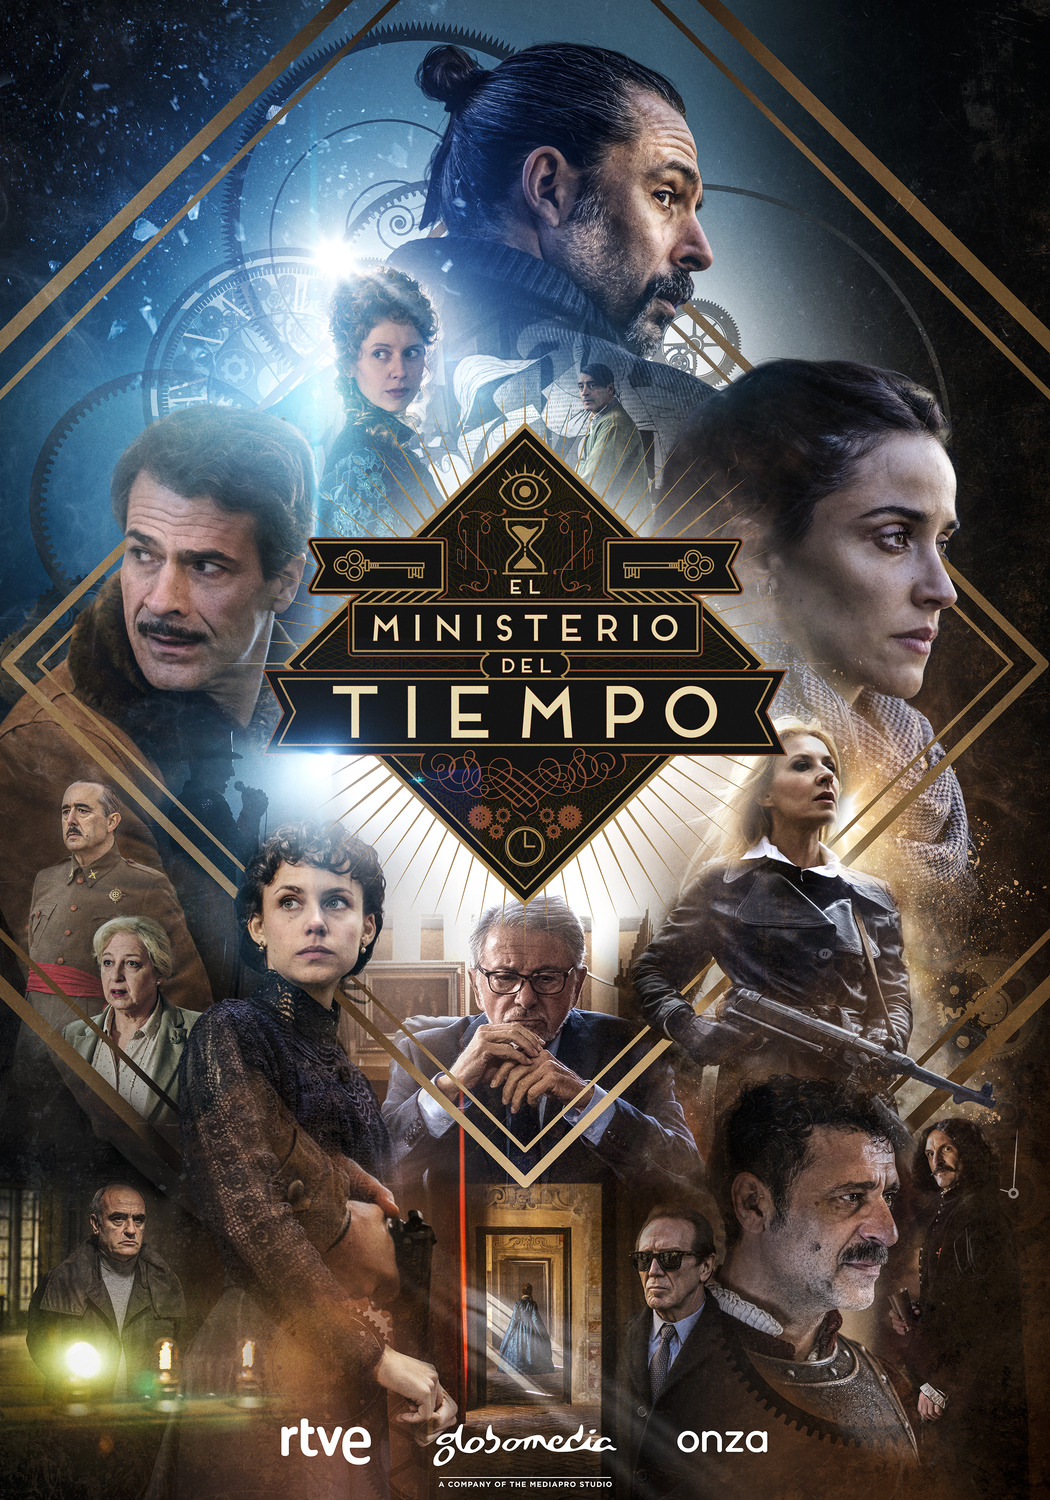 Extra Large TV Poster Image for El ministerio del tiempo (#2 of 2)